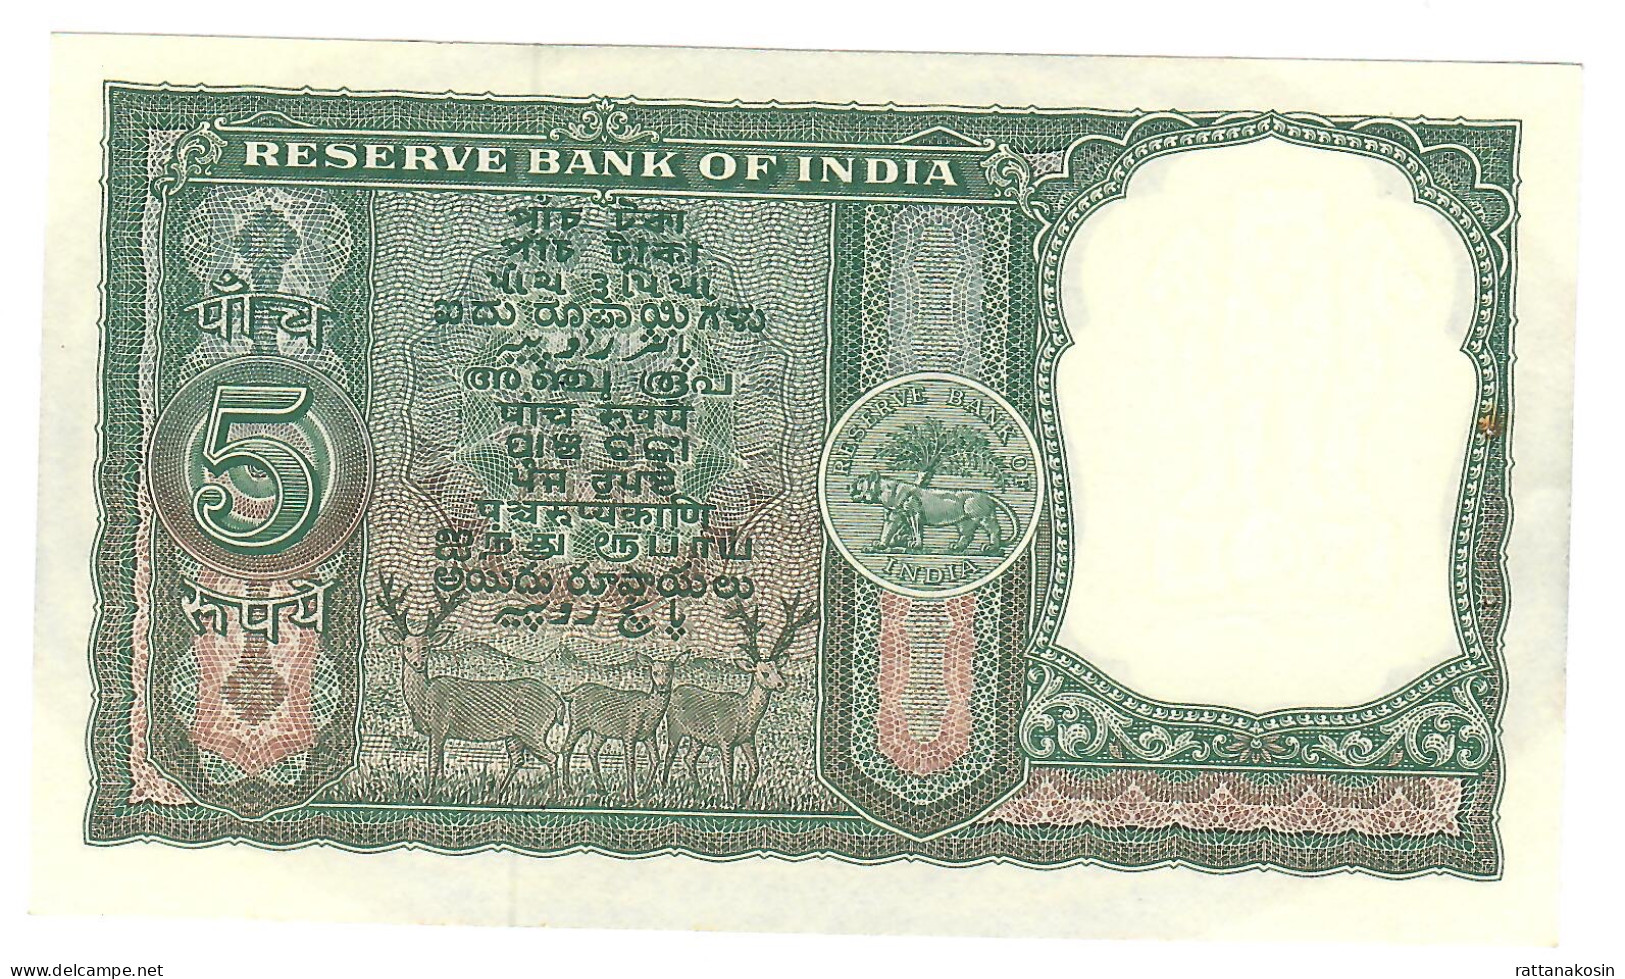 INDIA P36b 5 RUPEES 1964  Signature BHATTACHARYA   LETTER B     UNC. 2 Usual P.h. - Indien